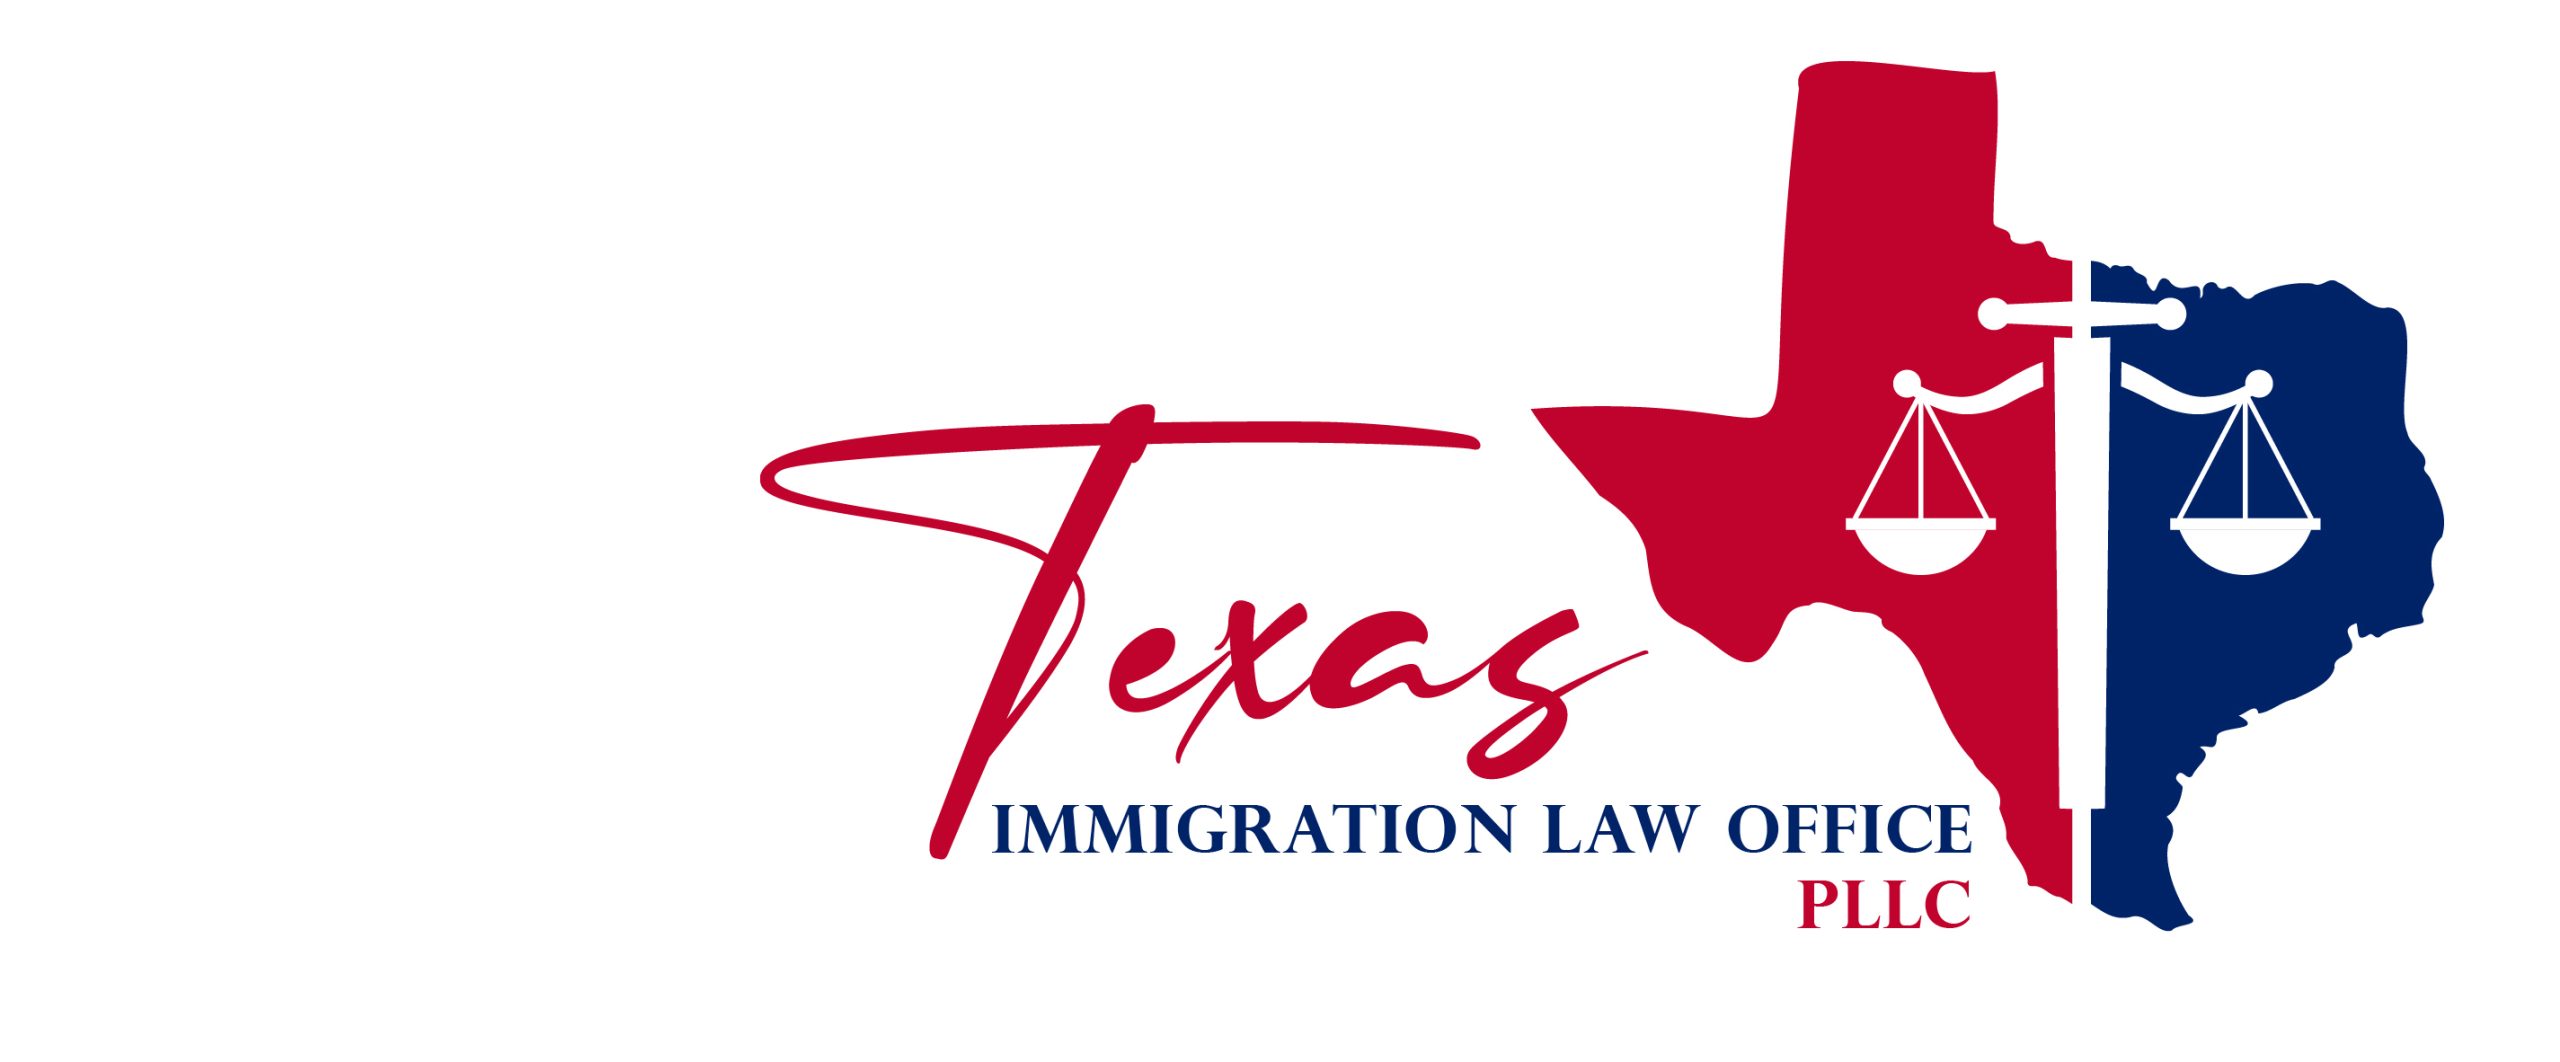 Texas Immigration Law Office